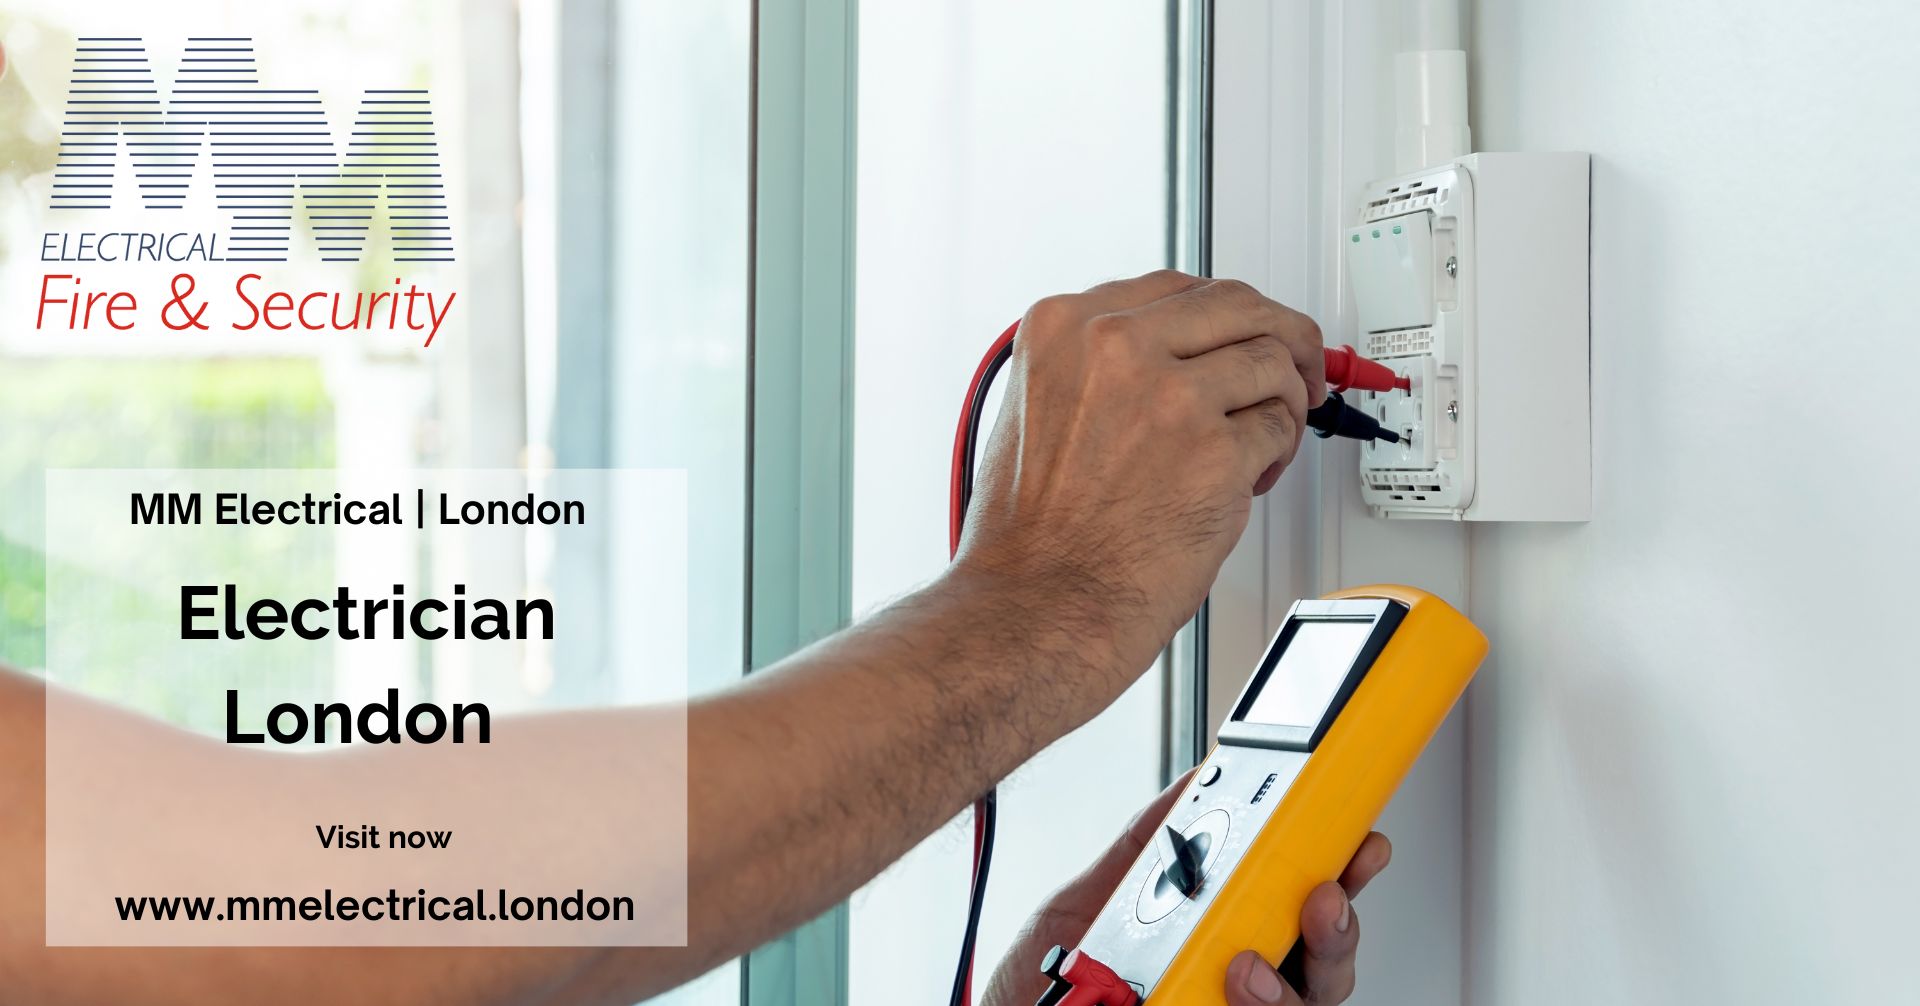 Electrician London: Elevate Safety Standards with EICR Reports